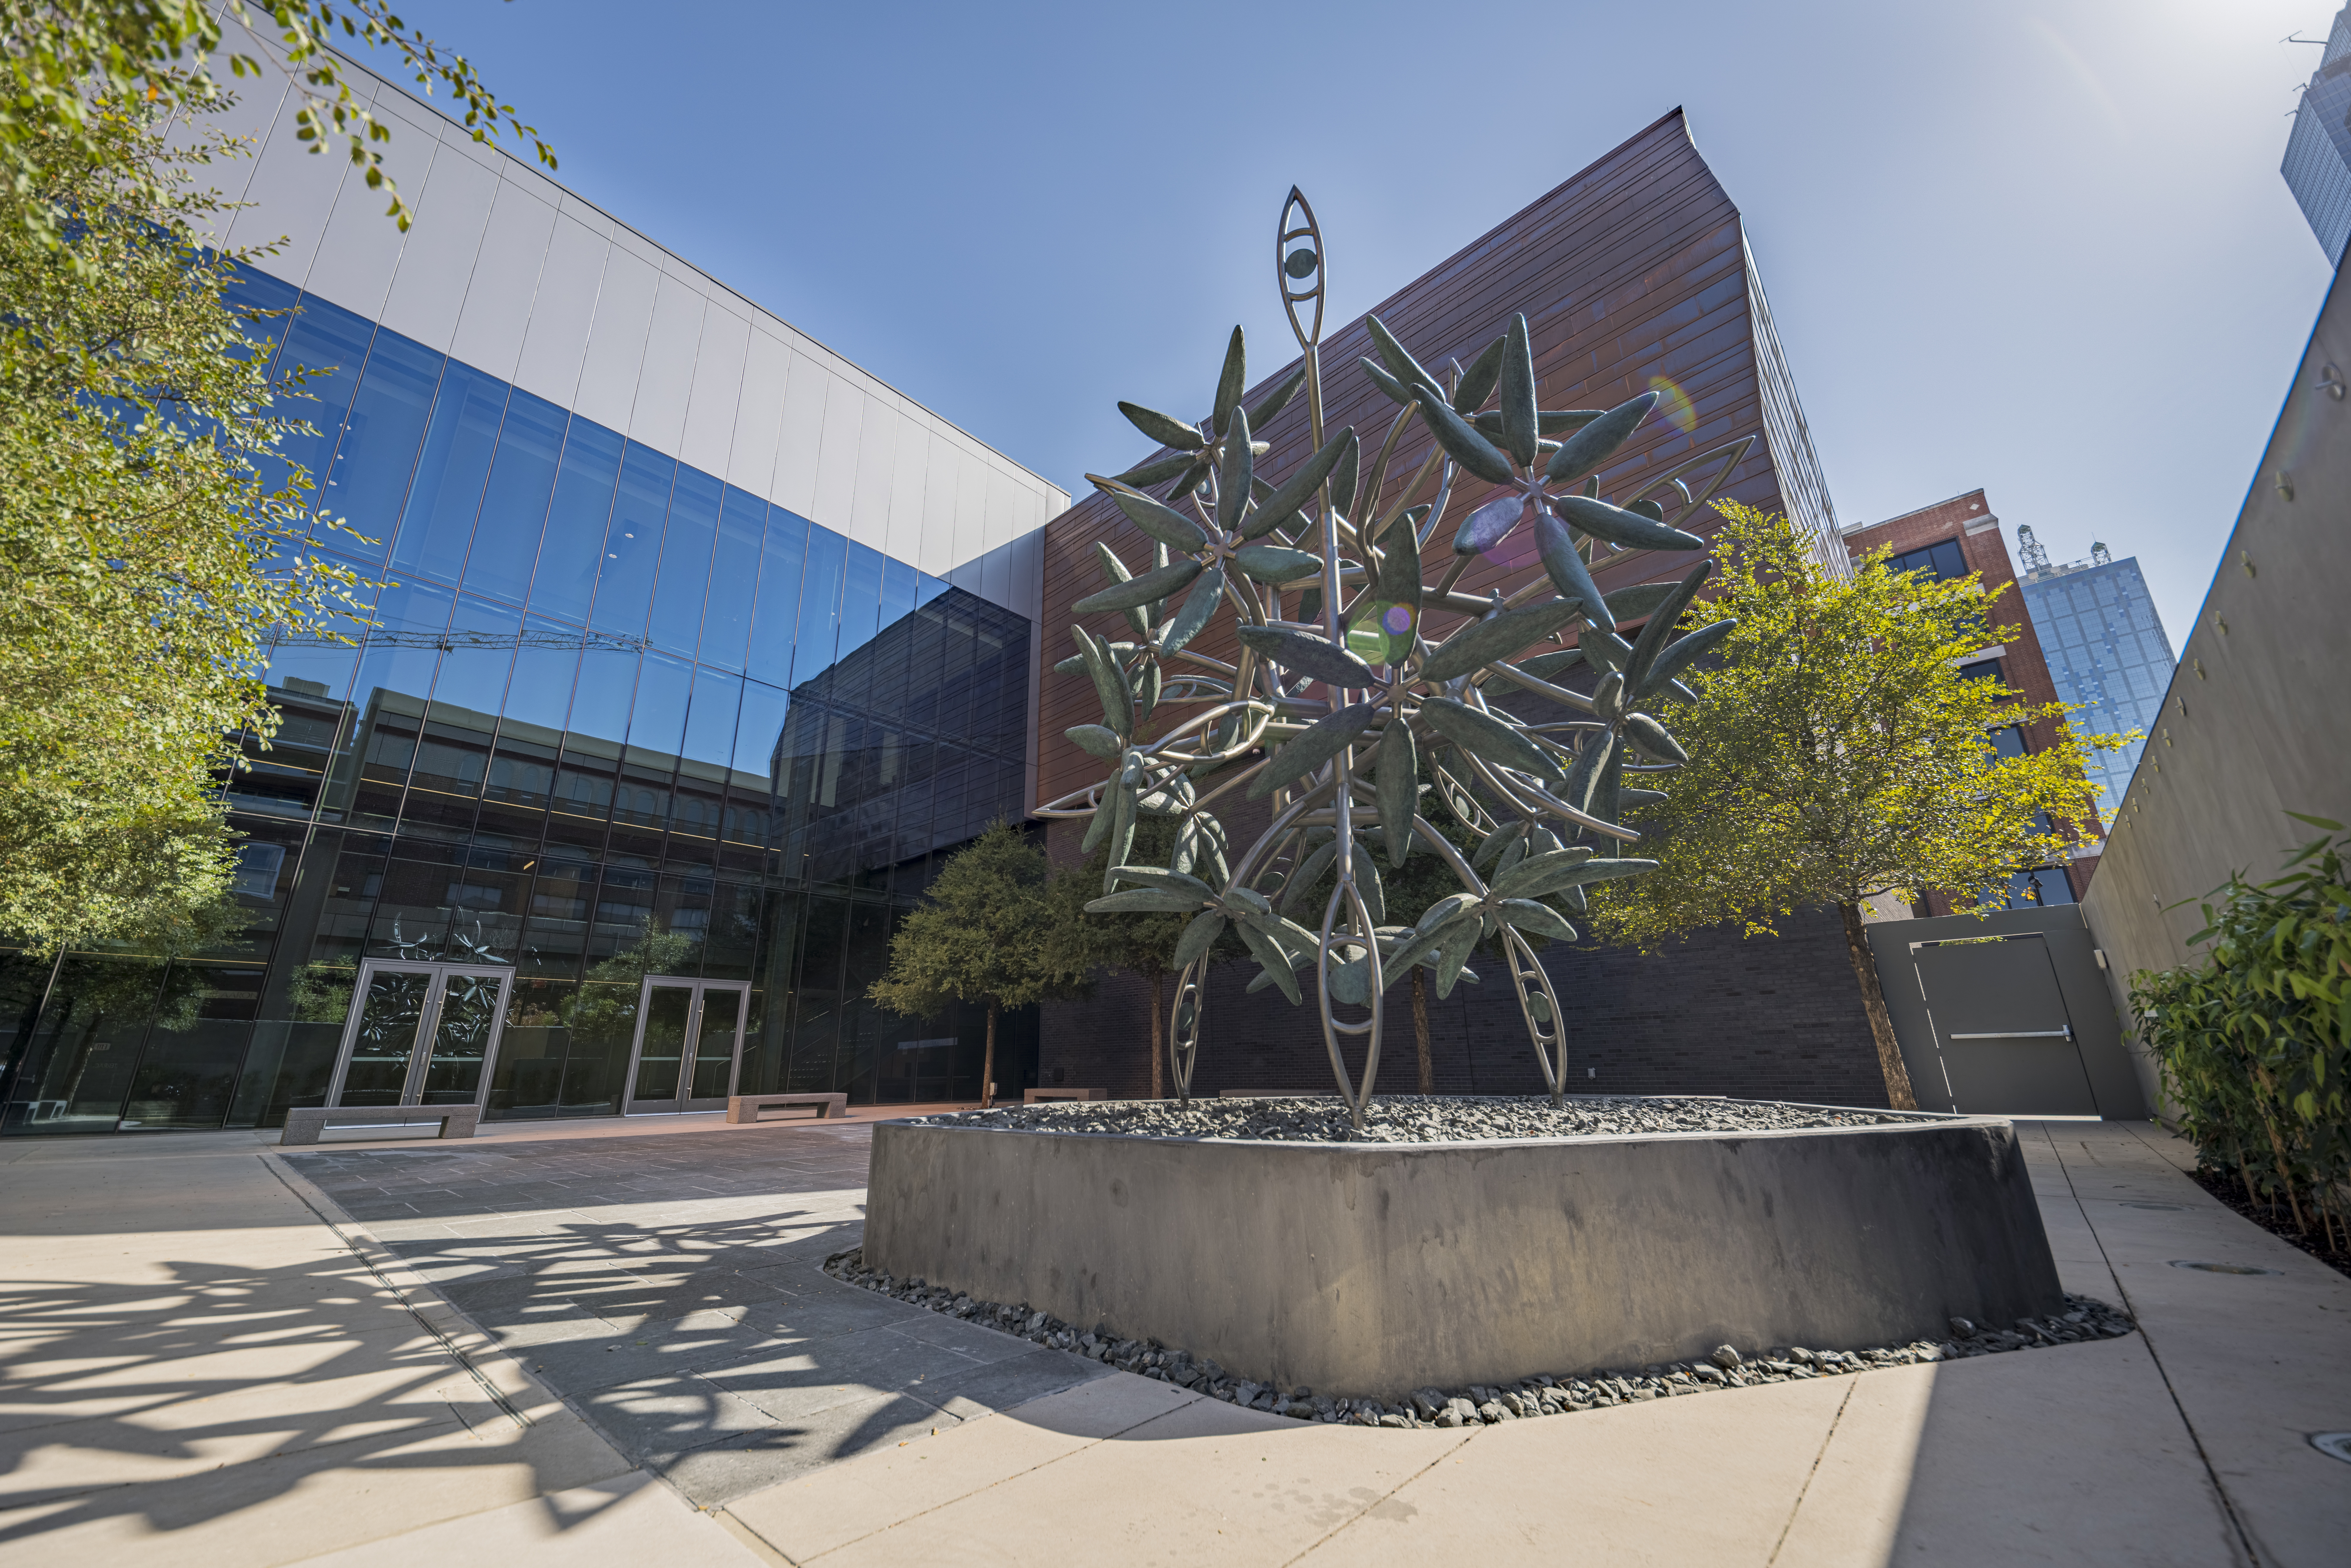 This Place, Everywhere (2019), a sculpture created by Texas artist James Surls. The sculpture’s six-petal flowers represent the six million Jews murdered during the Holocaust. The sculpture’s eighteen flowers represent Chai, the Hebrew word for life. Eighteen eyes are also interspersed throughout the sculpture, either looking down at the past and what was lost, or upwards to envision better lives for future generations. Photo: Courtesy Dallas Holocaust and Human Rights Museum